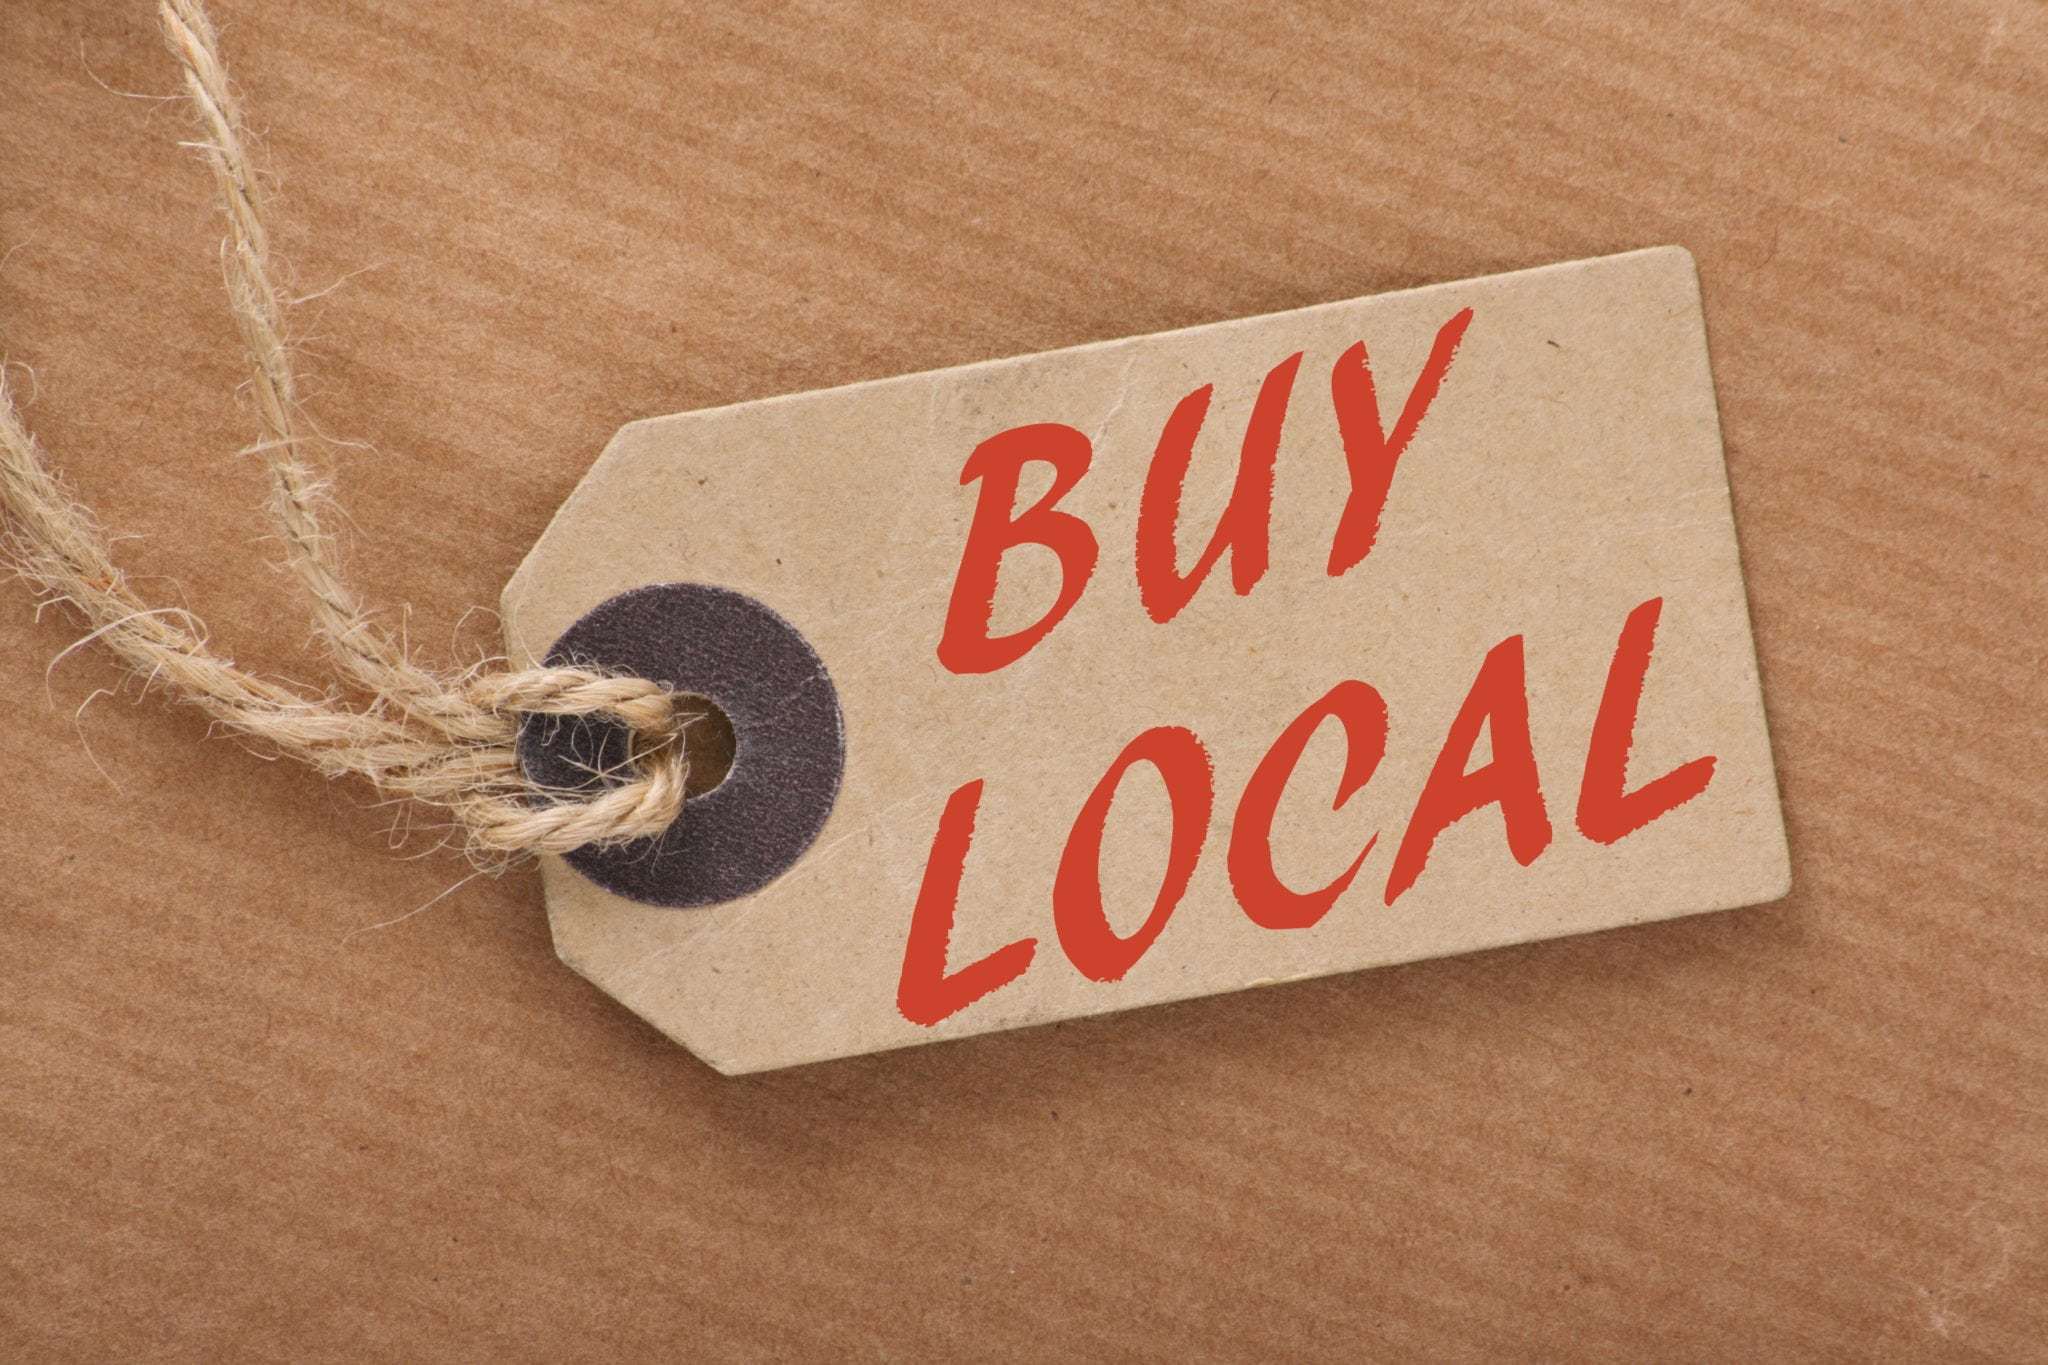 Buy Local – Lowen’s guide to 11 gifts to support local this holiday season